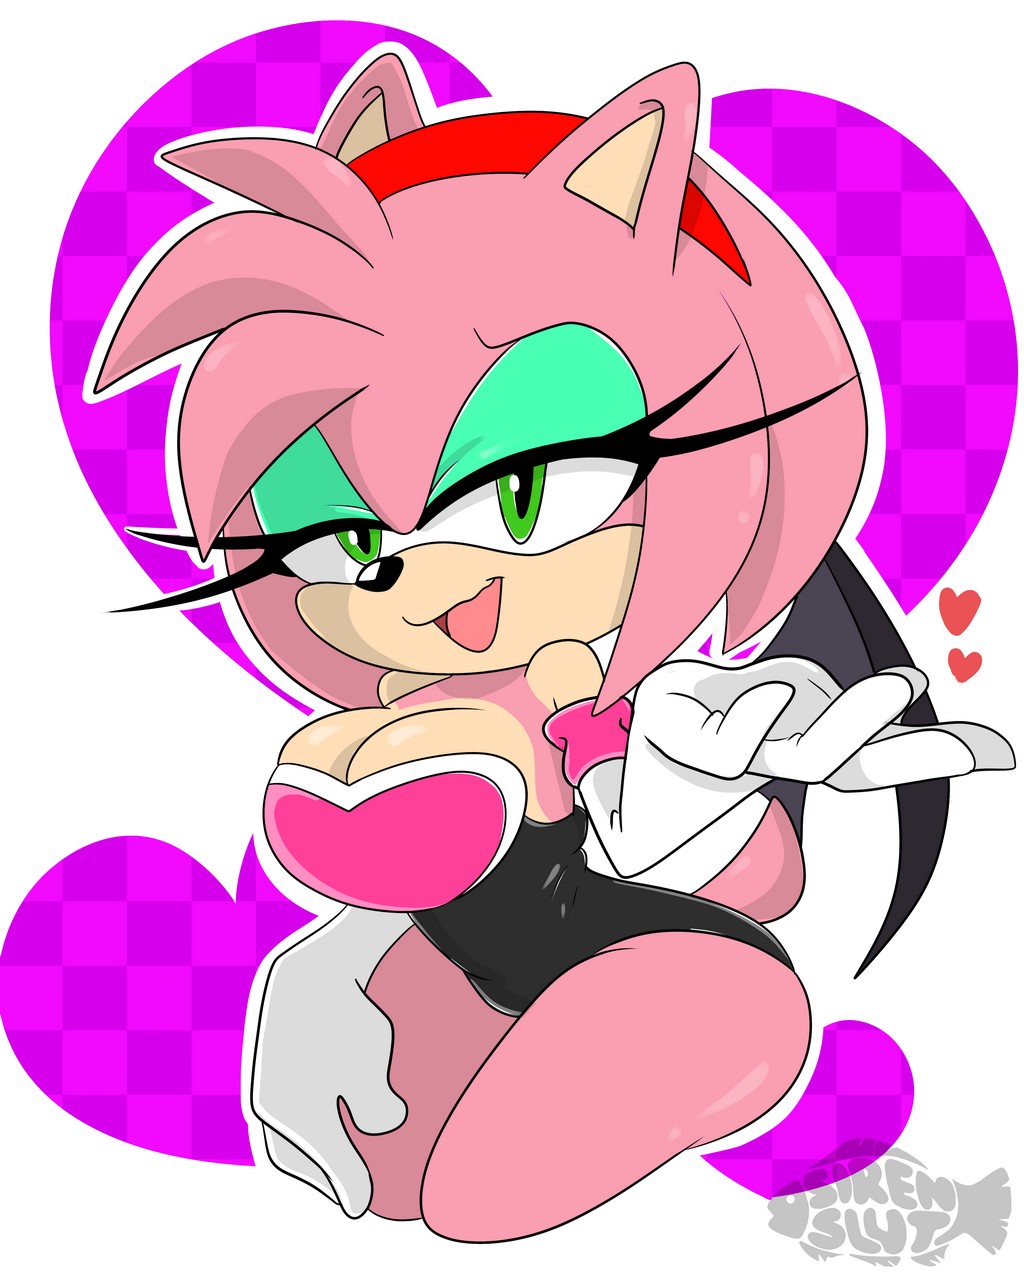 Amy Rose Rouge The Bat By Sirenslu